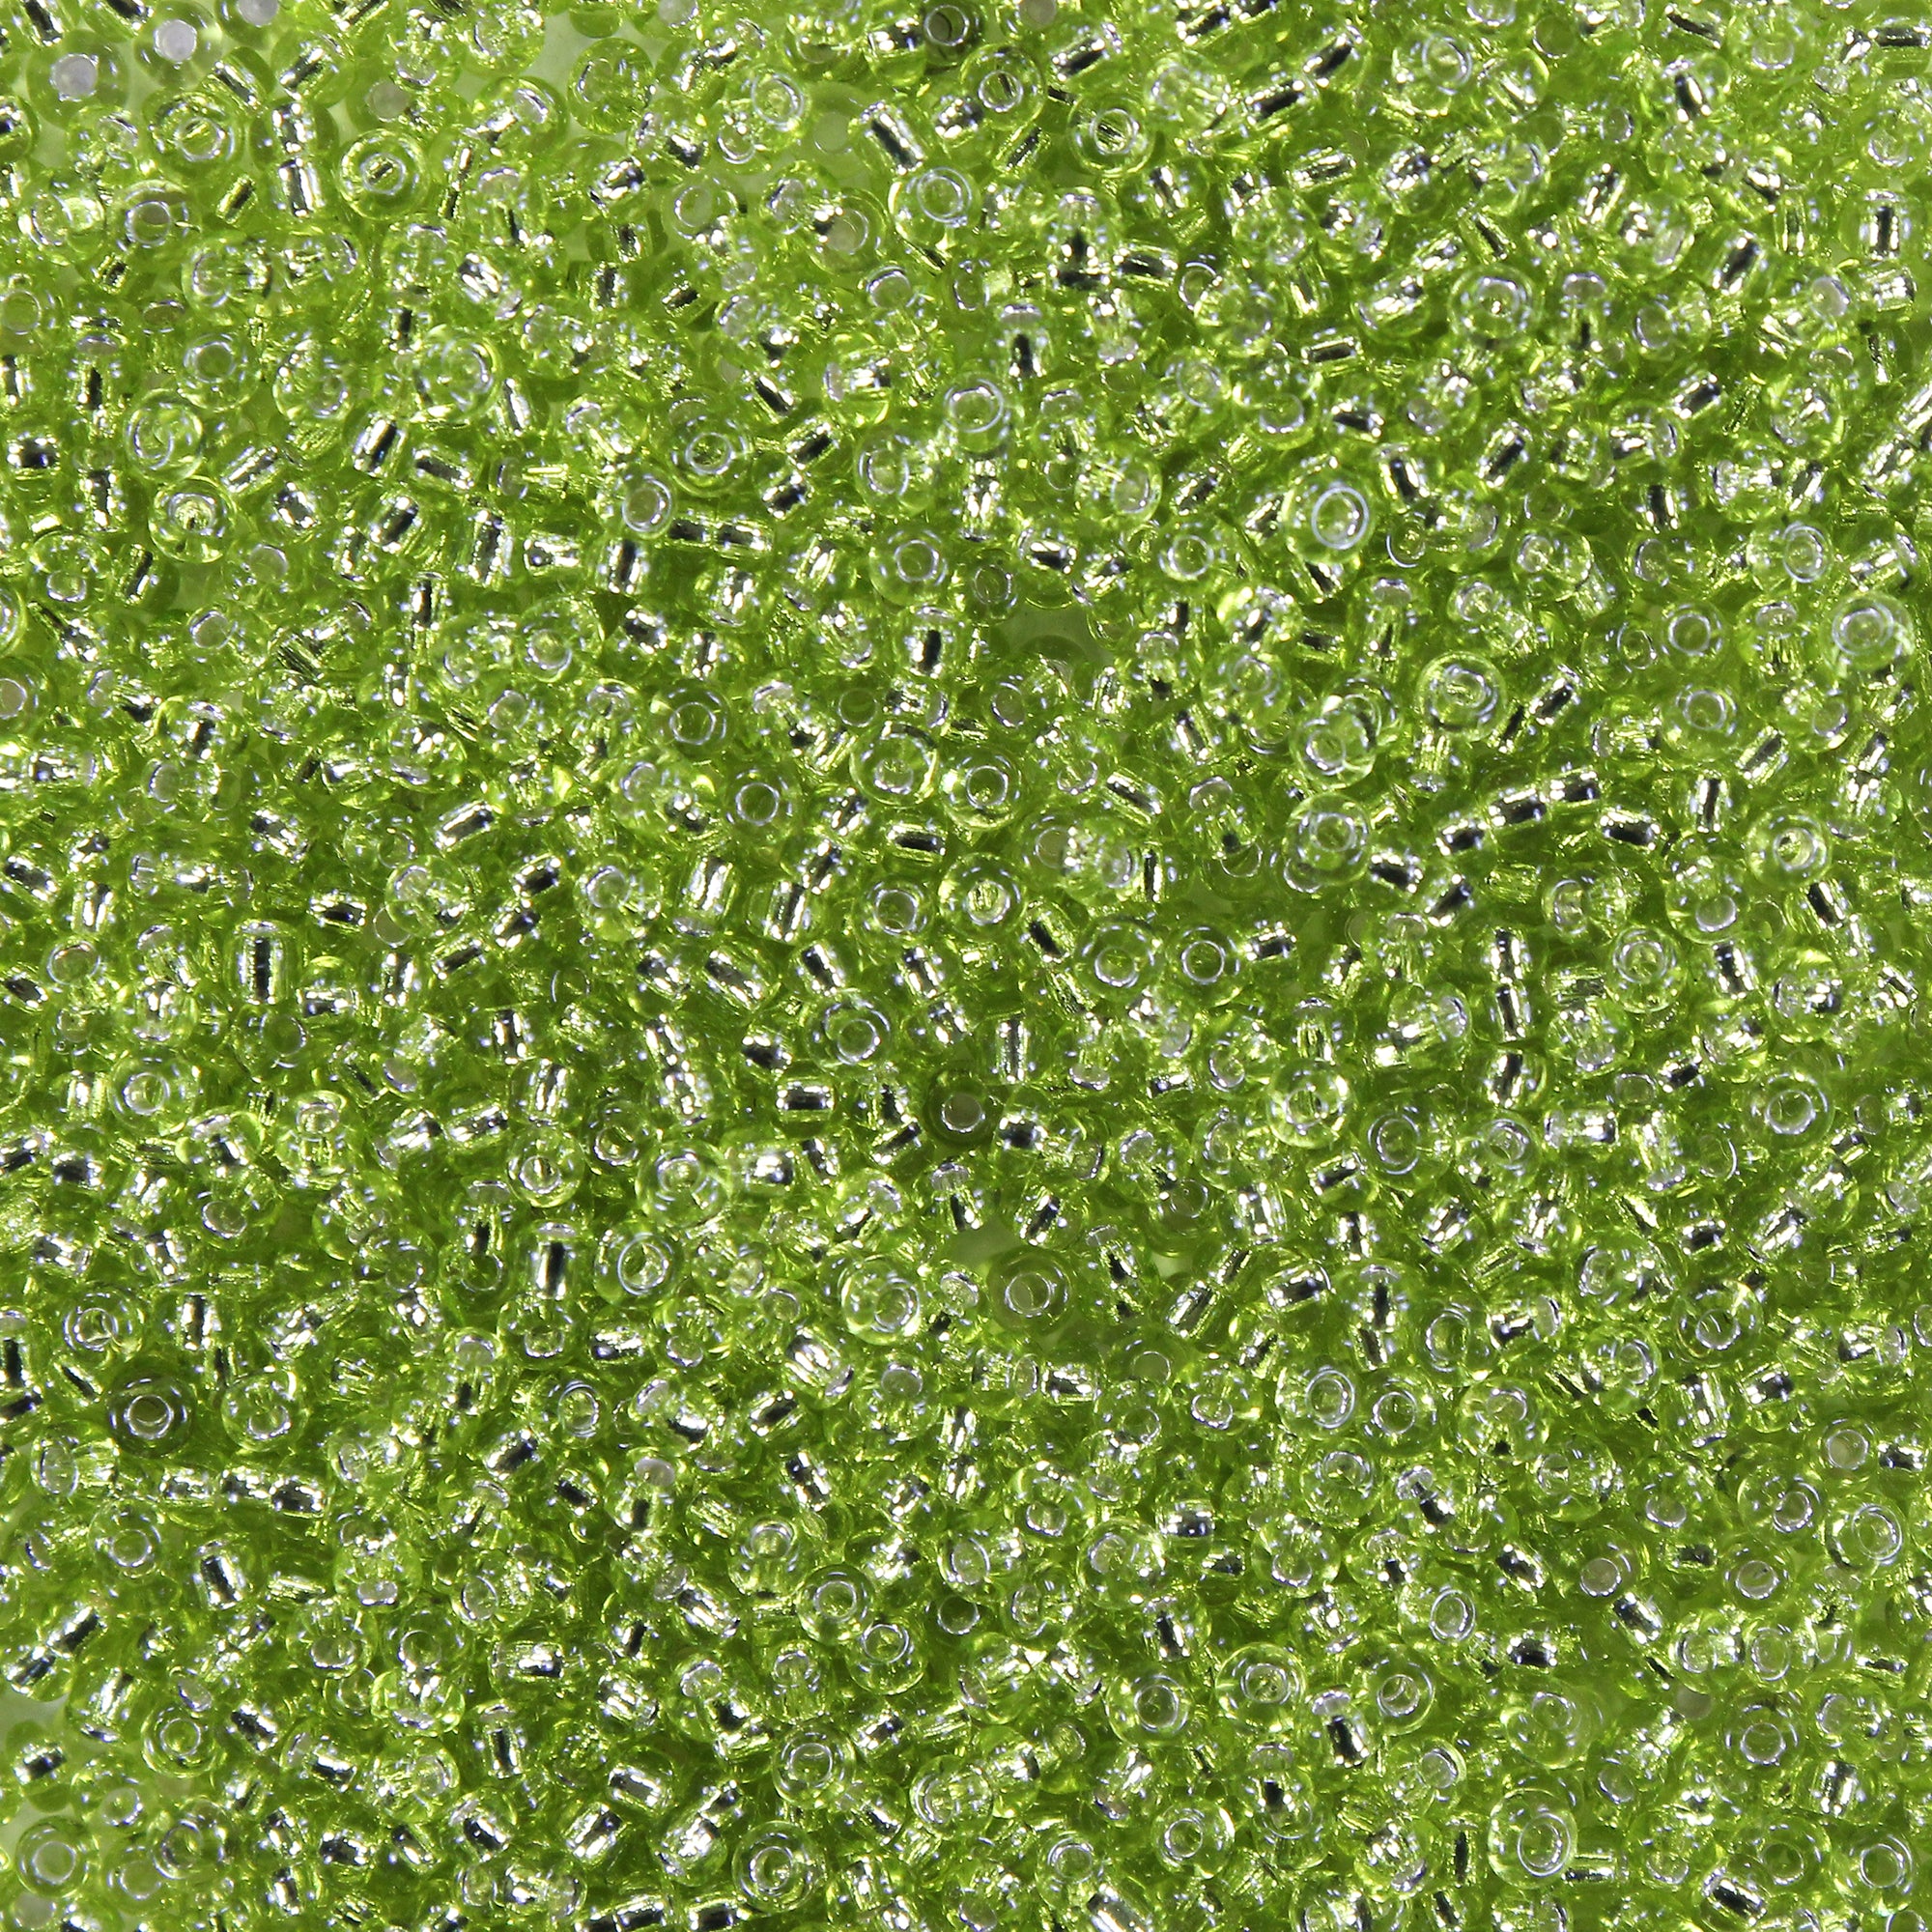 Seed Beads Transparent Green 0.5Mm 30Gm